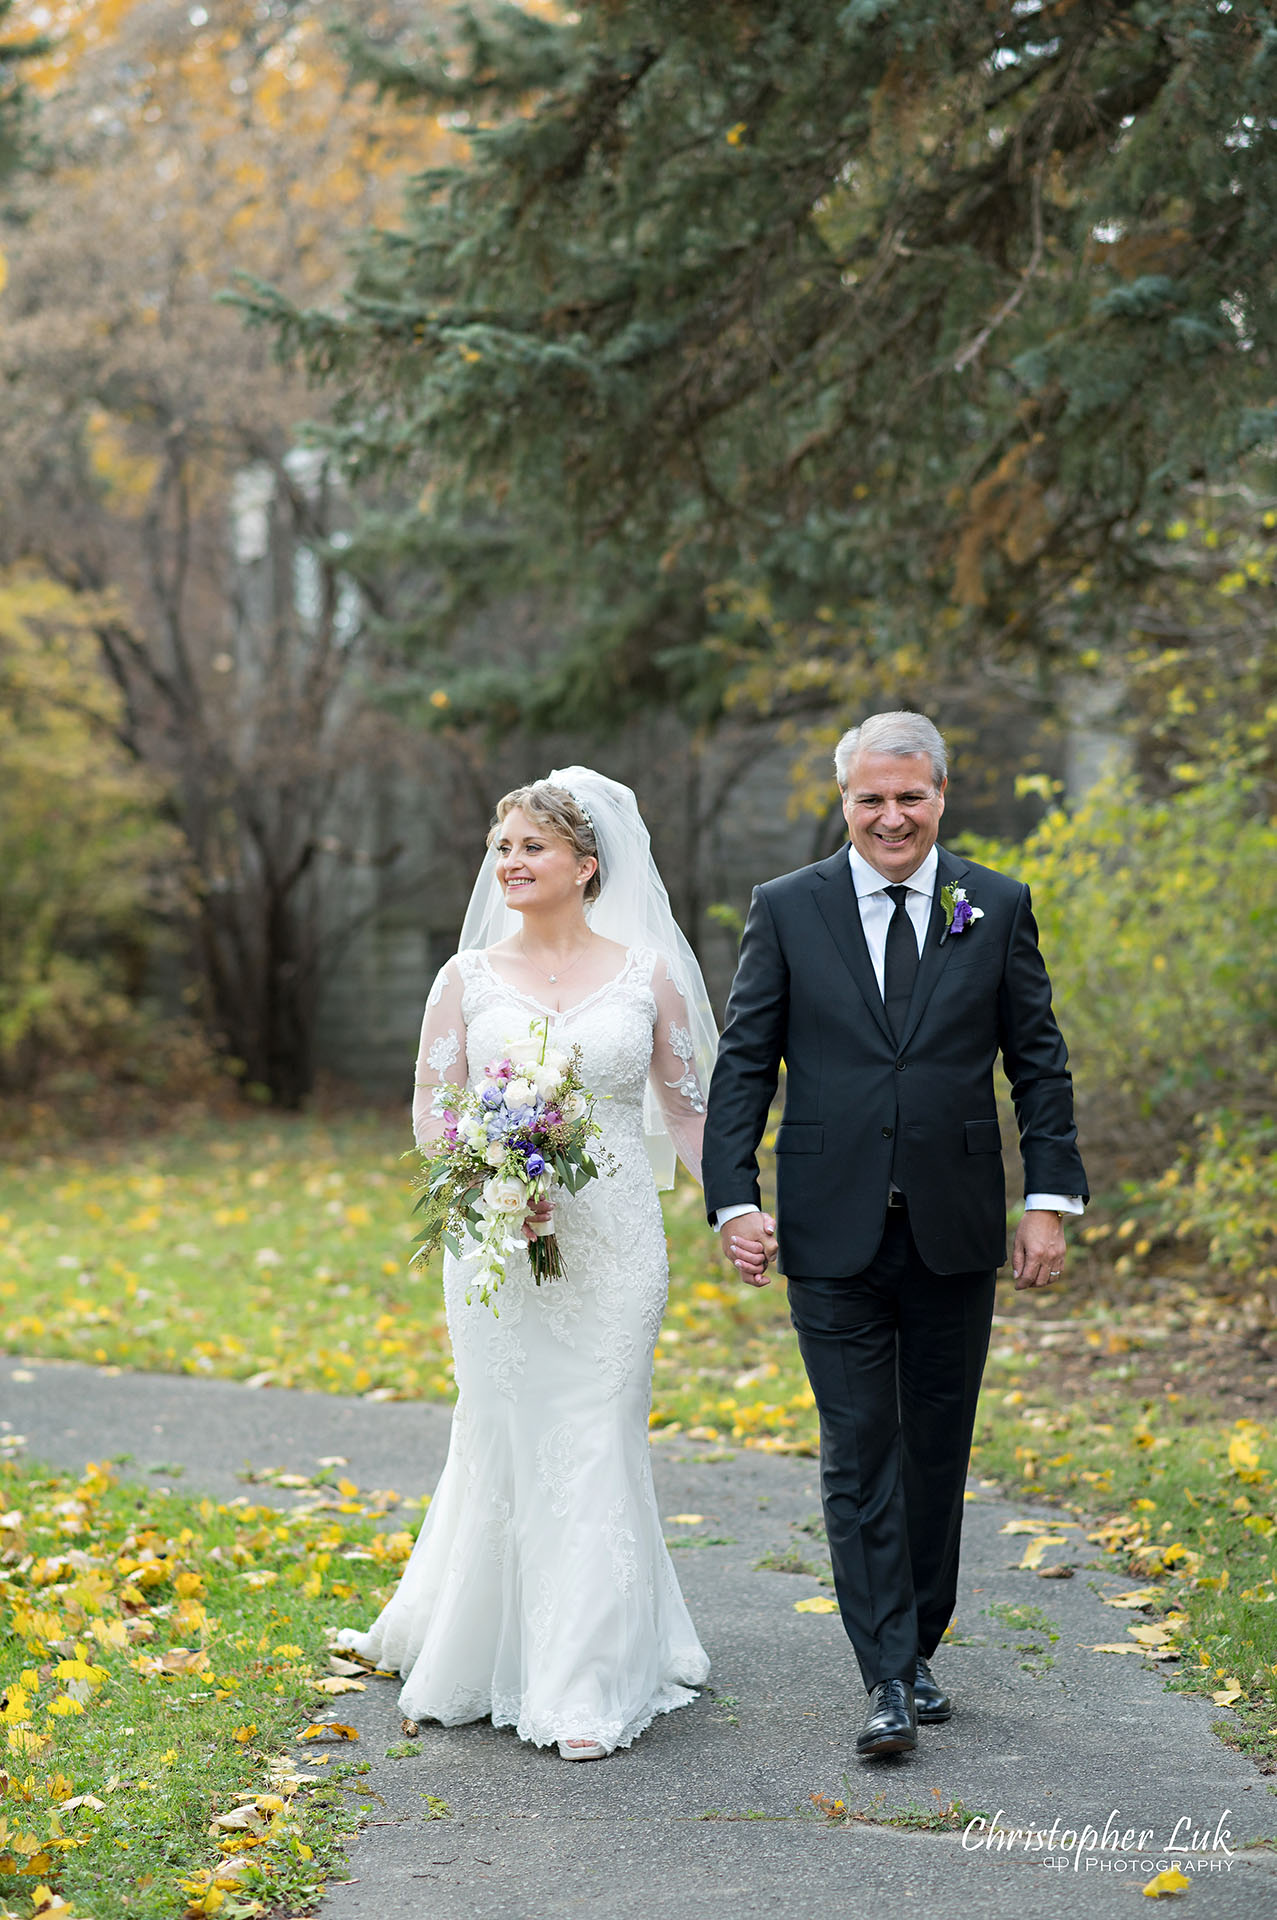 Christopher Luk Toronto Wedding Photographer Natural Candid Photojournalistic Tyndale Chapel Autumn Fall Leaves Bride Groom Holding Hands Walking Together Portrait